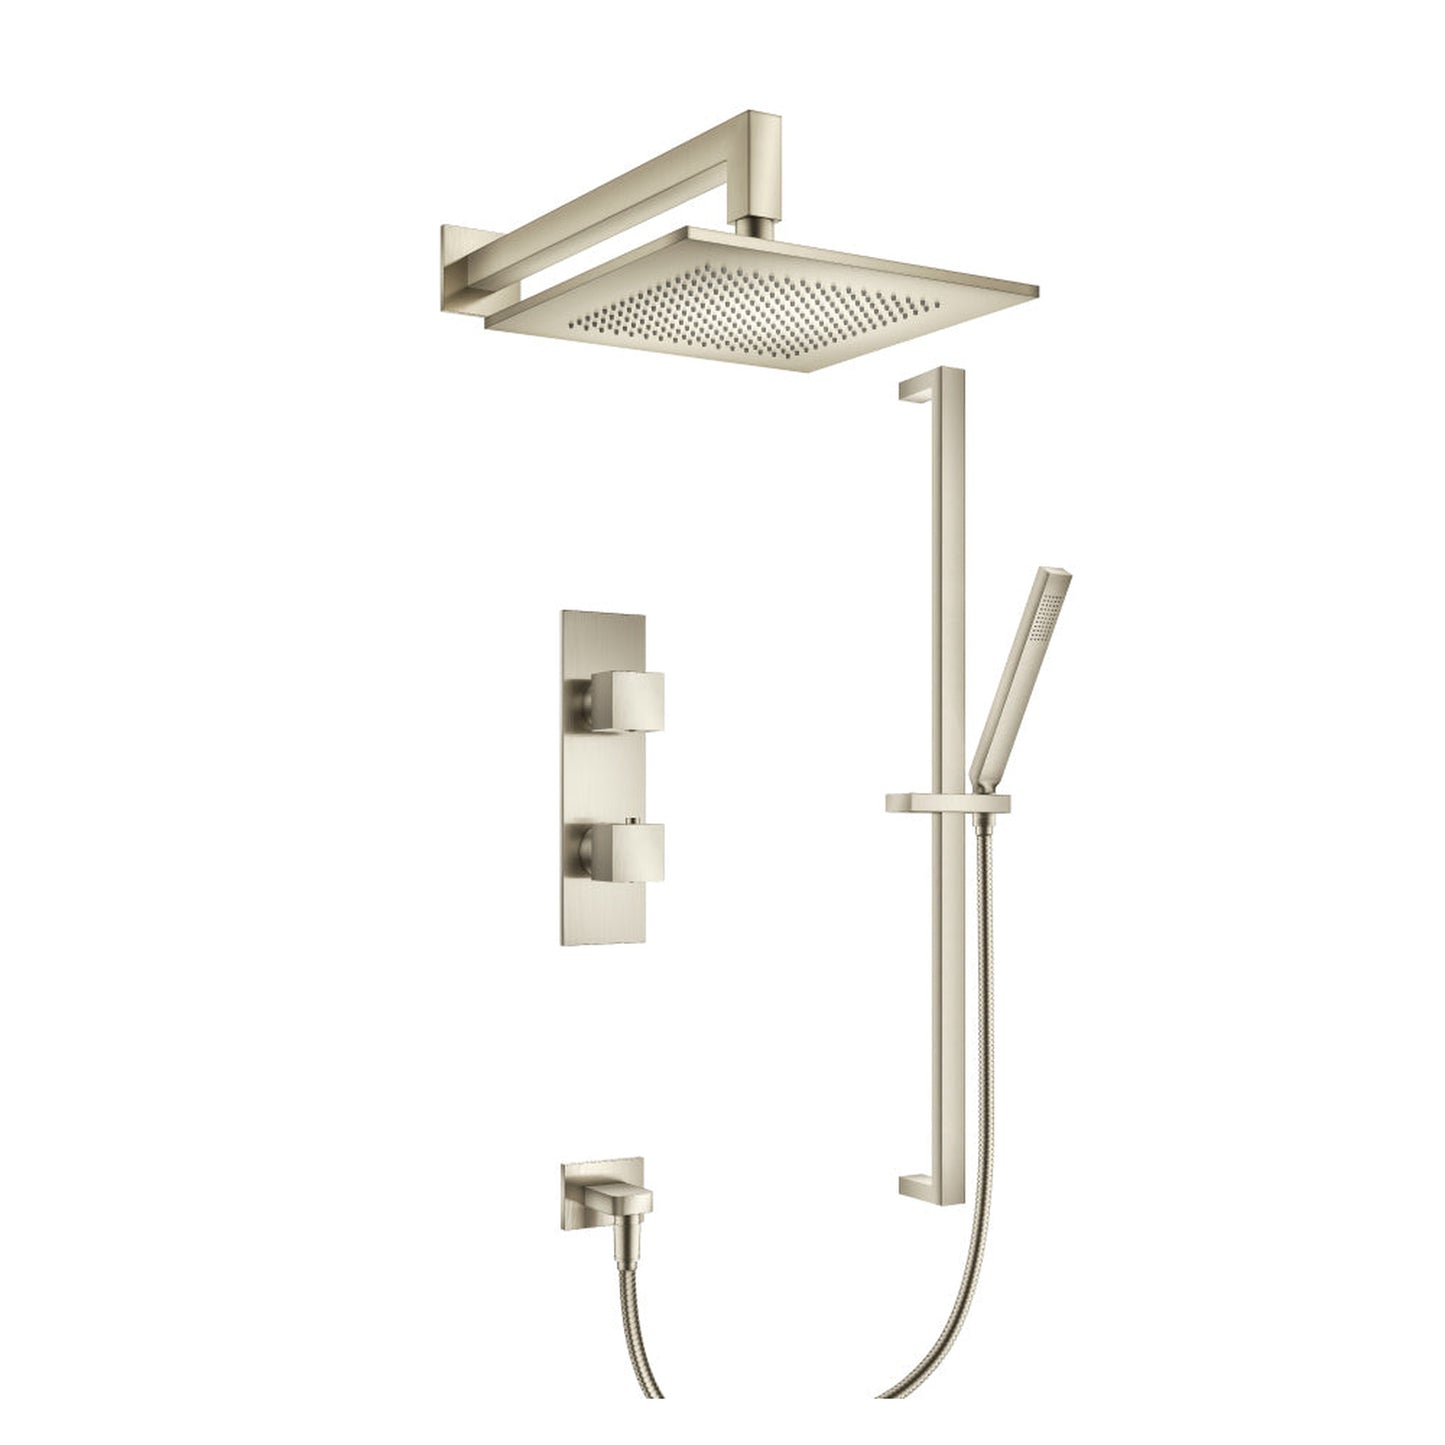 Isenberg Serie 160 Two Output Shower Set With Shower Head, Hand Held and Slide Bar in Brushed Nickel (160.7300BN)